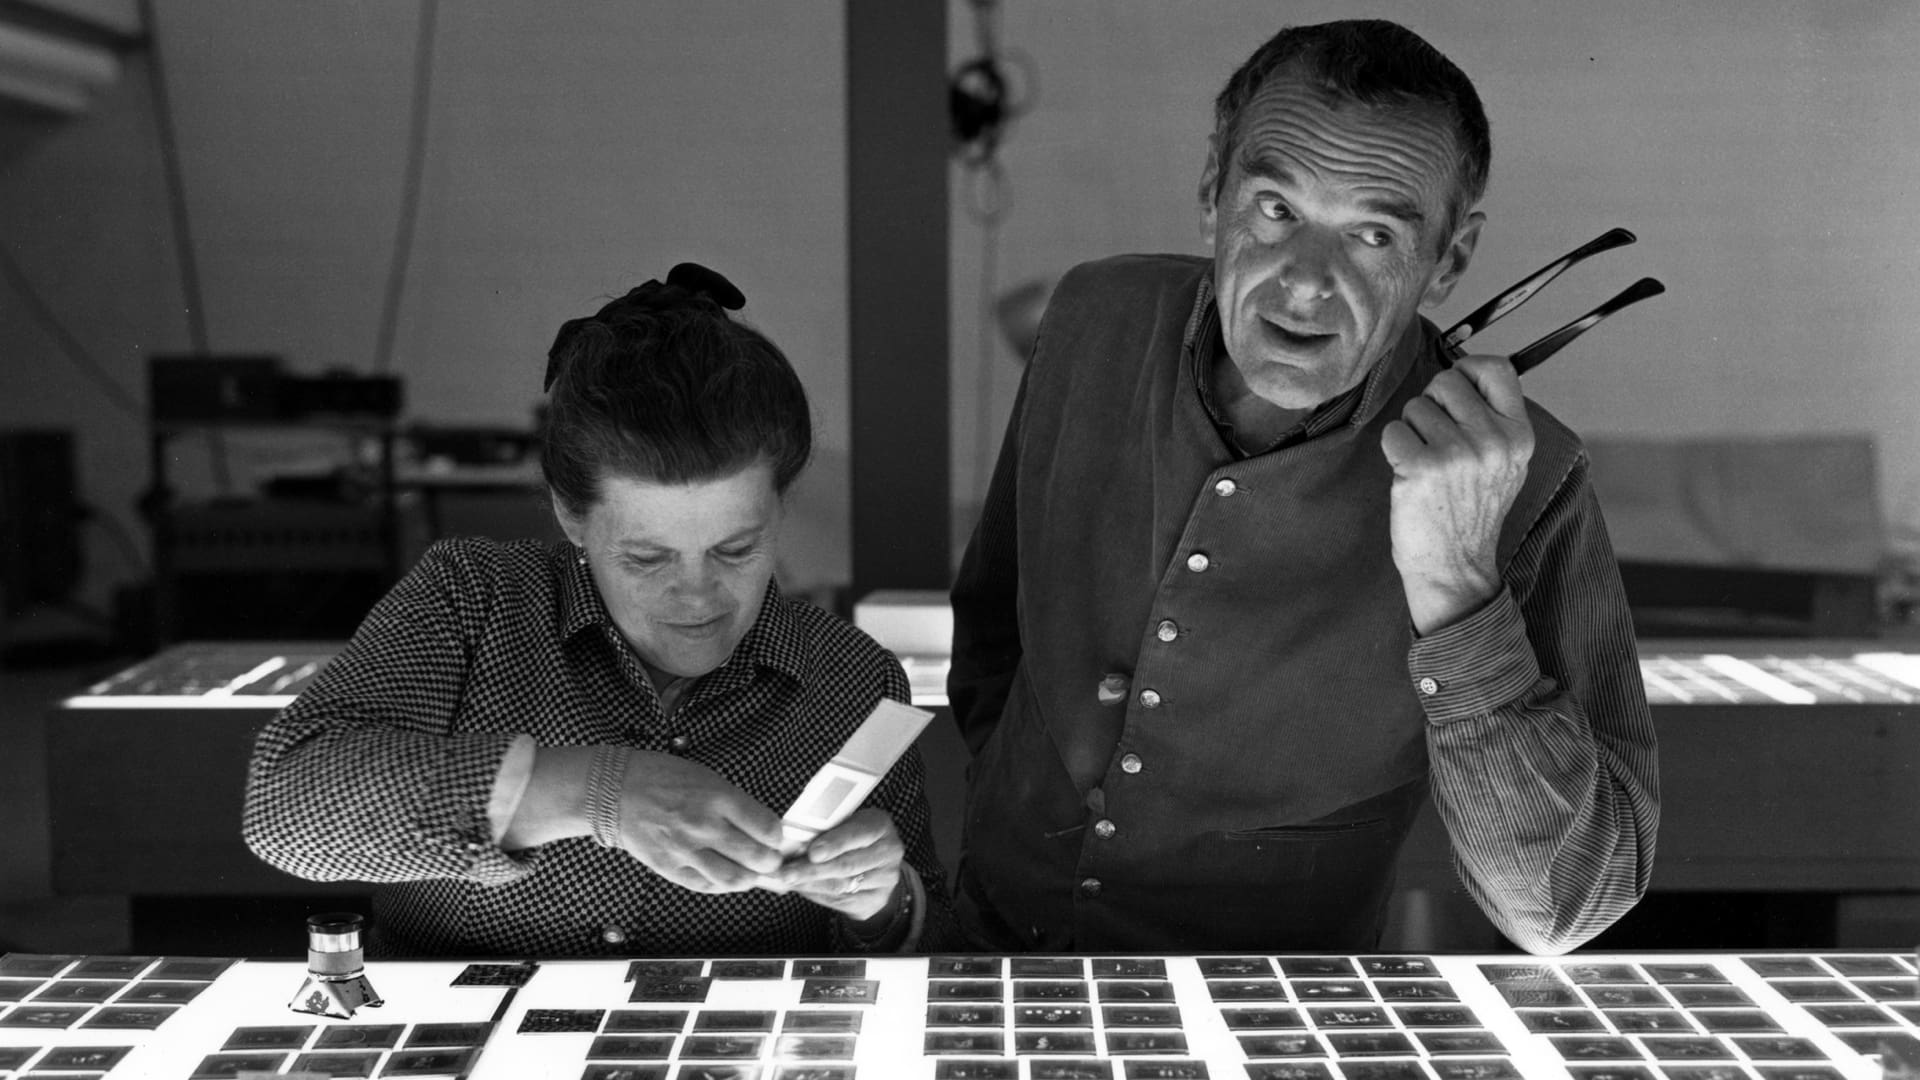 Eames: The Architect and the Painter 2011 123movies